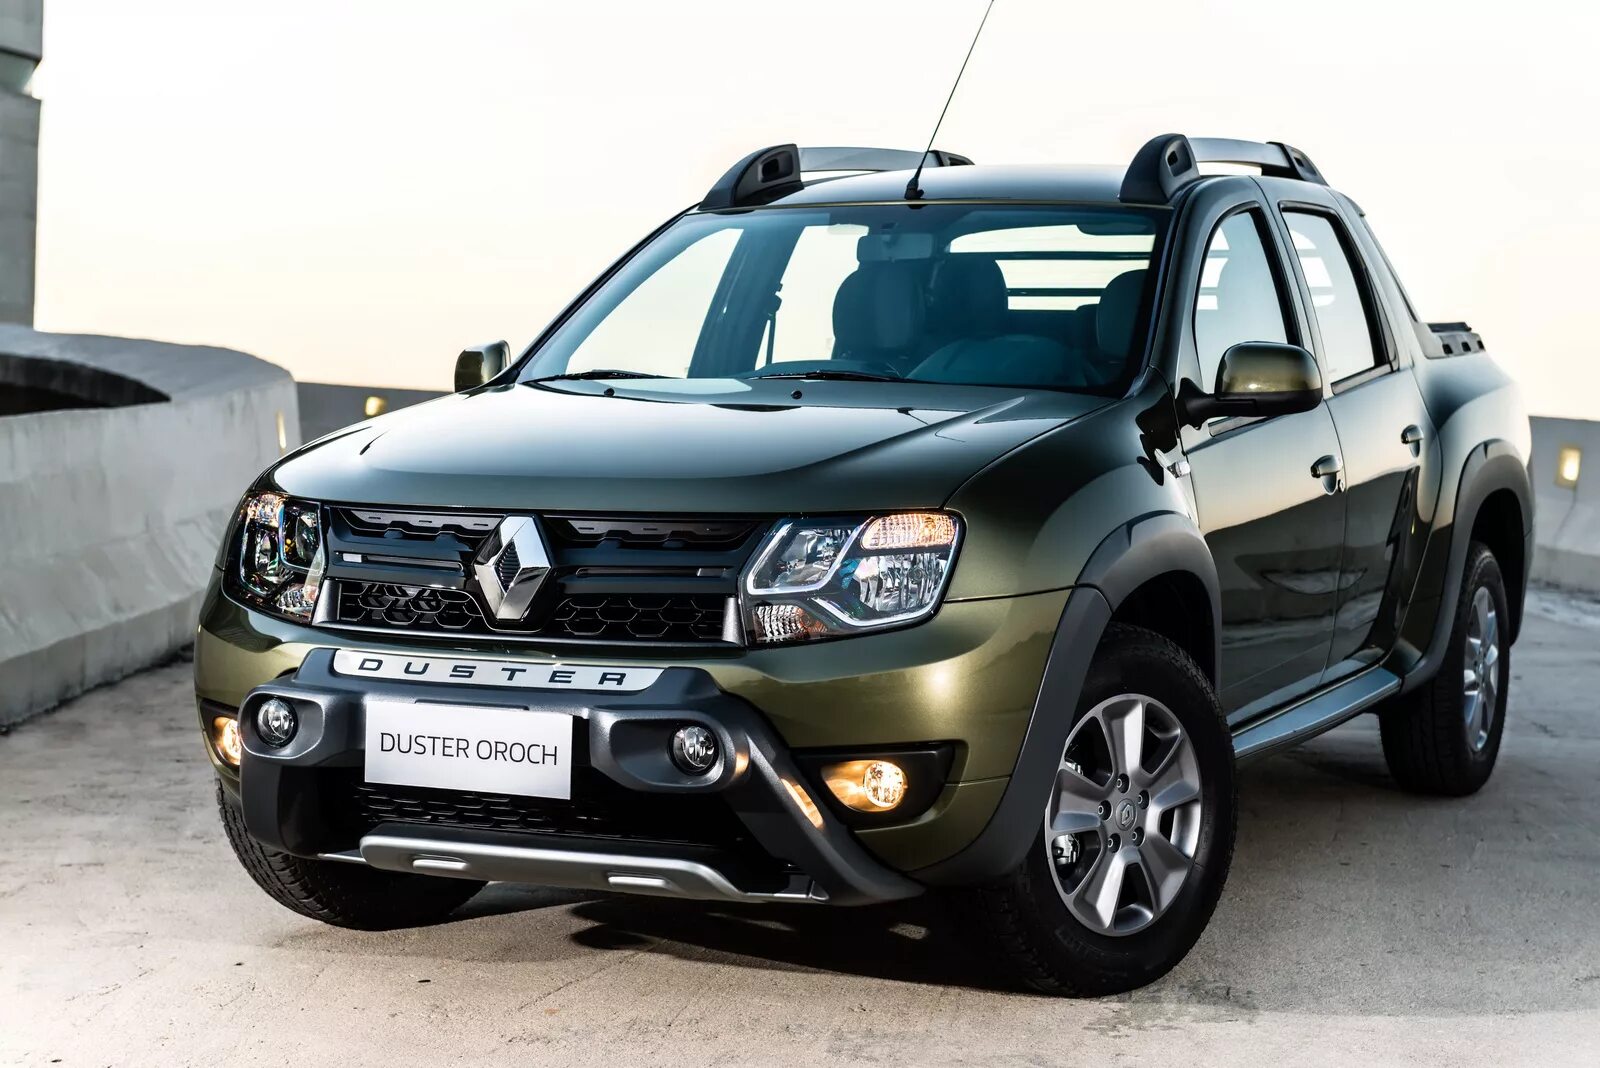 Renault Duster. Ренаулт Дастер. Рено Дастер пикап. Рено Дастер Ороч.